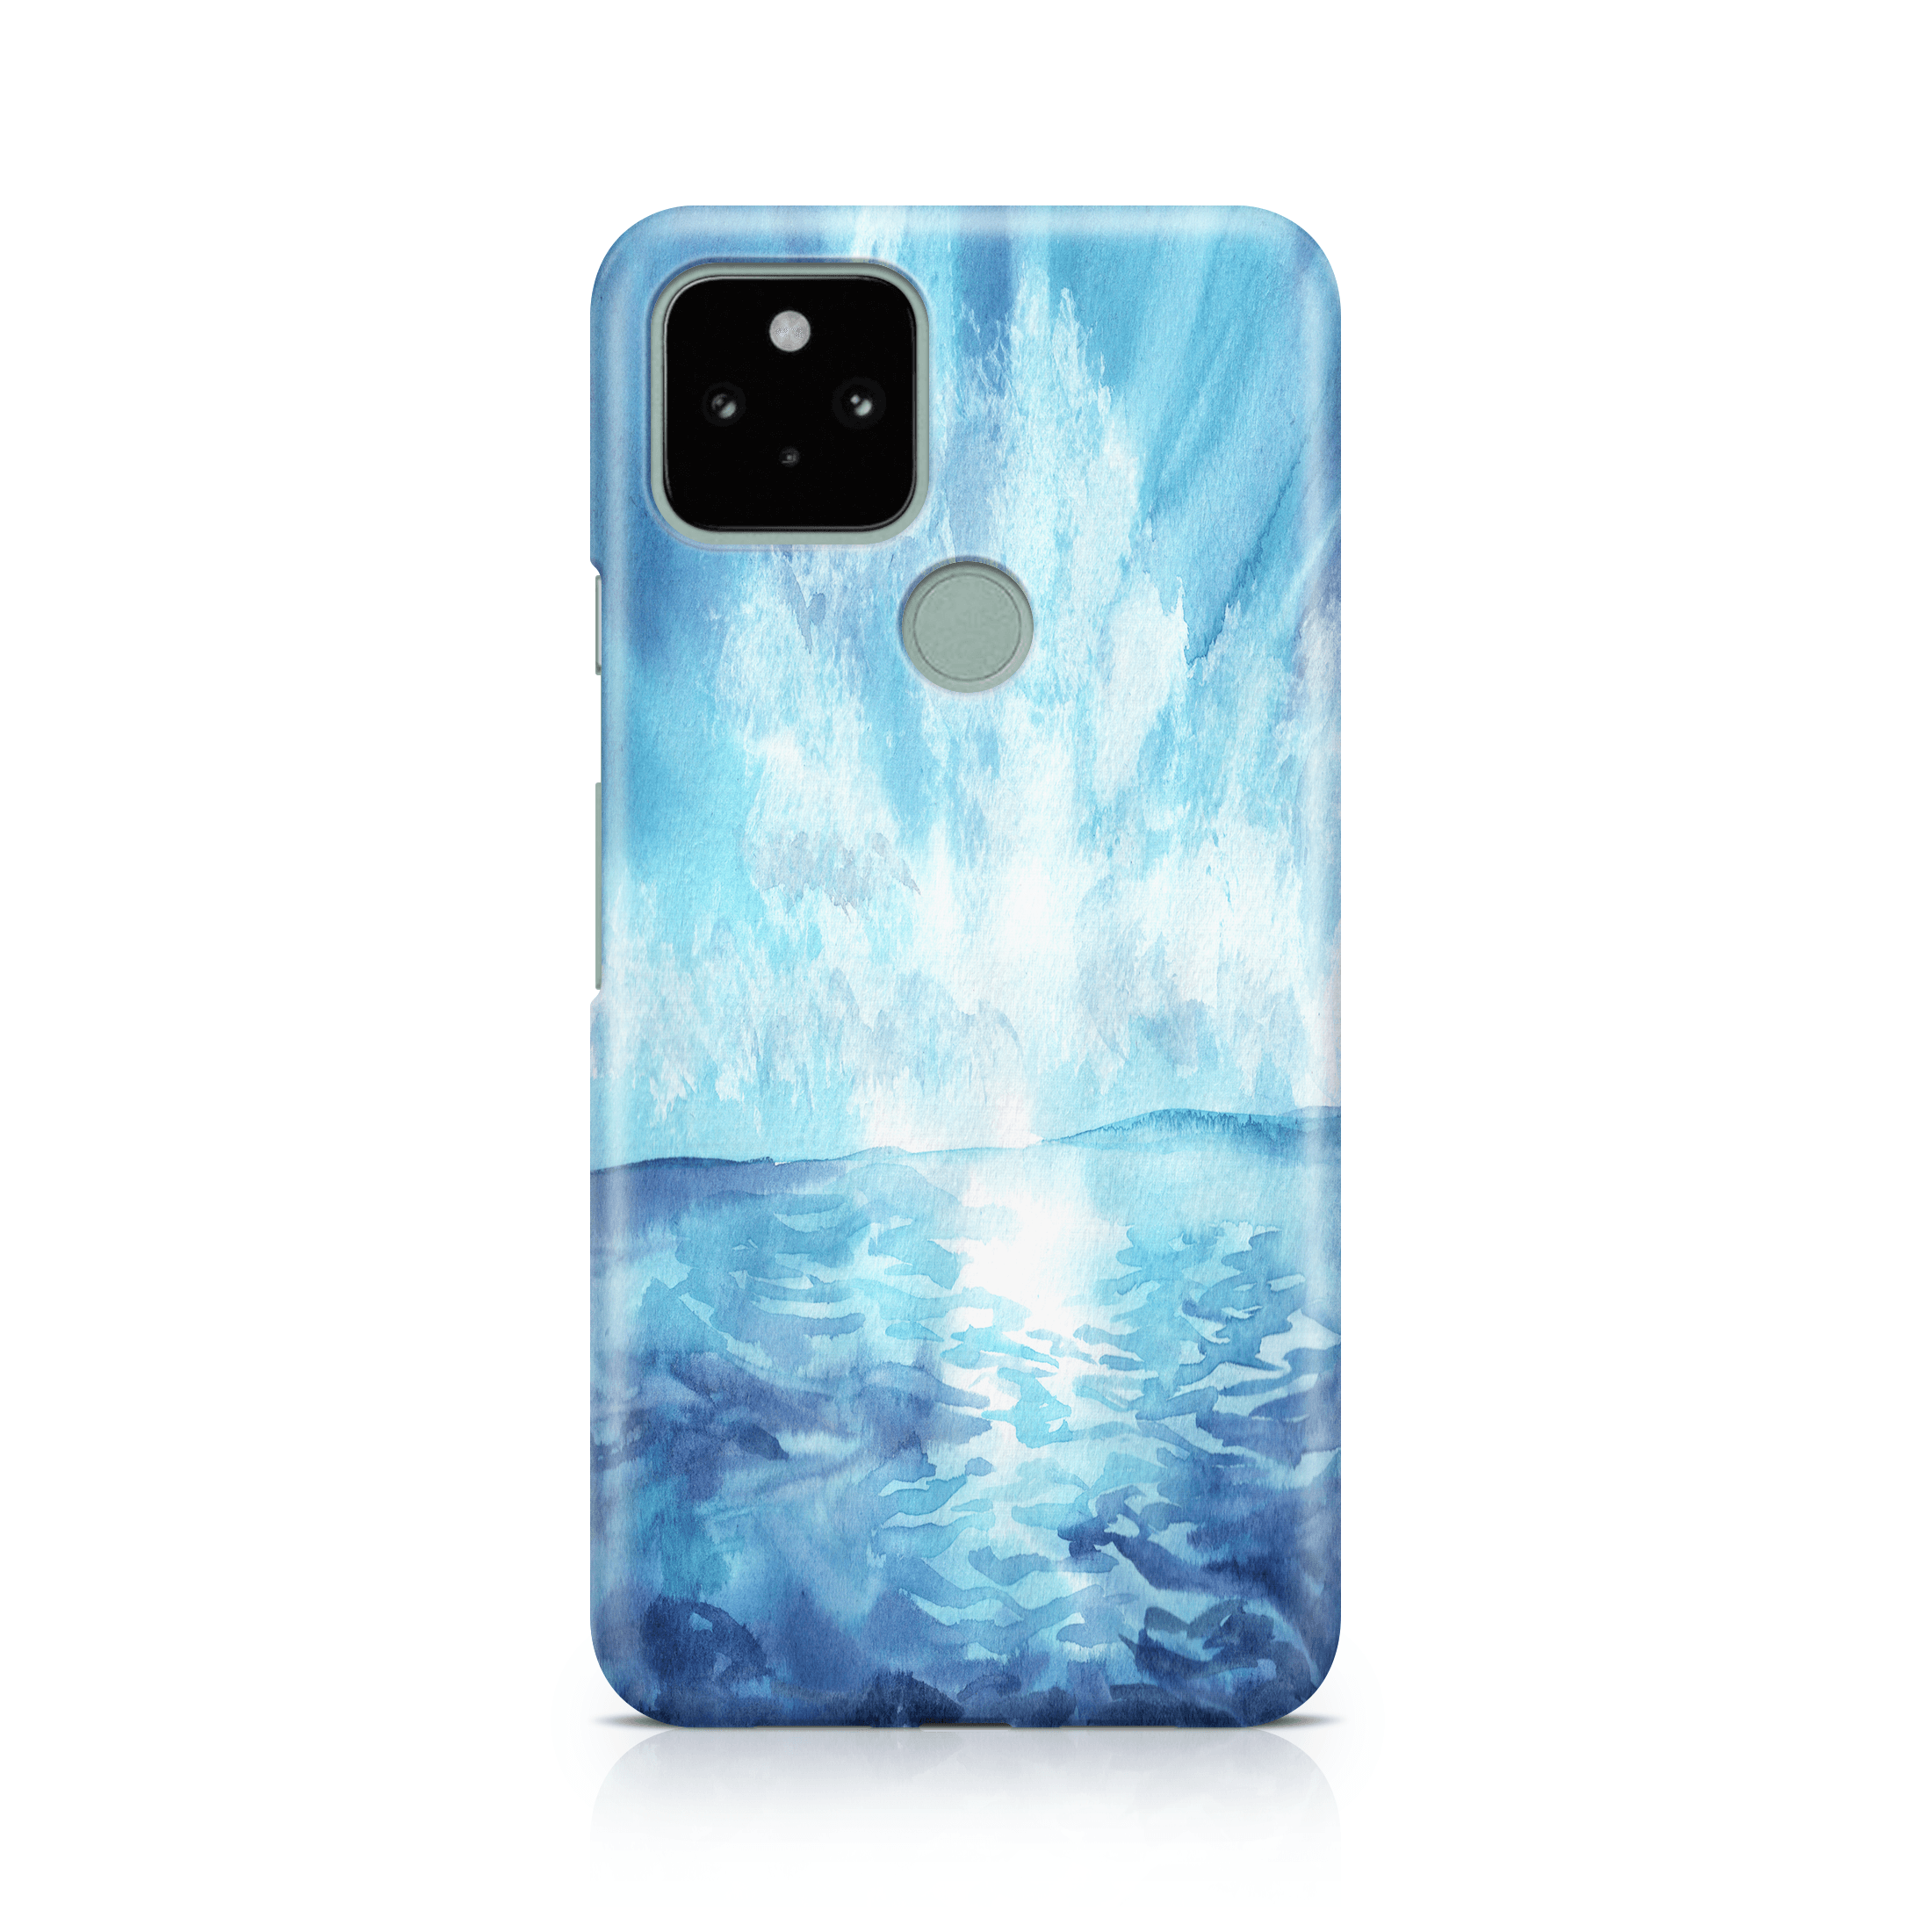 Blue Watercolor Sunrise - Google phone case designs by CaseSwagger